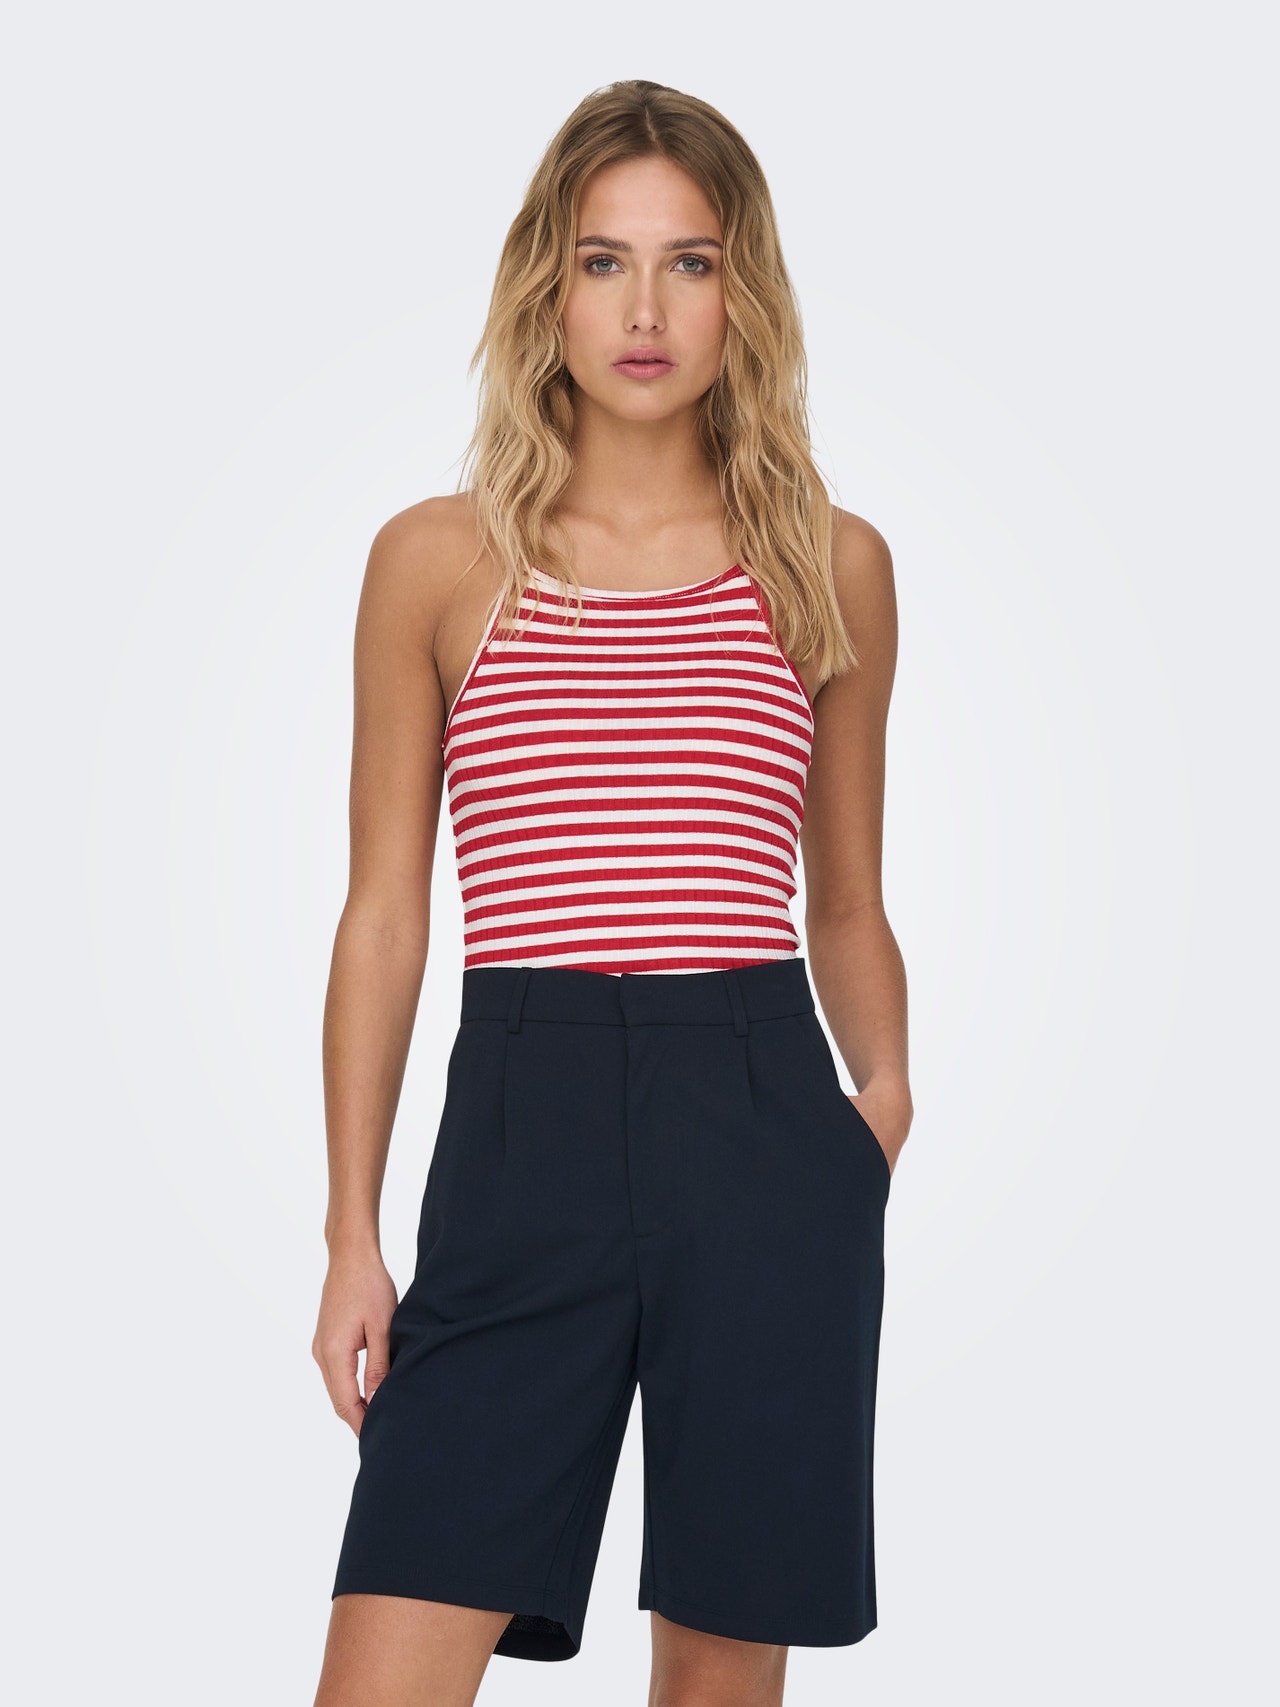 ONLY Striped Top -Cloud Dancer - 15253483